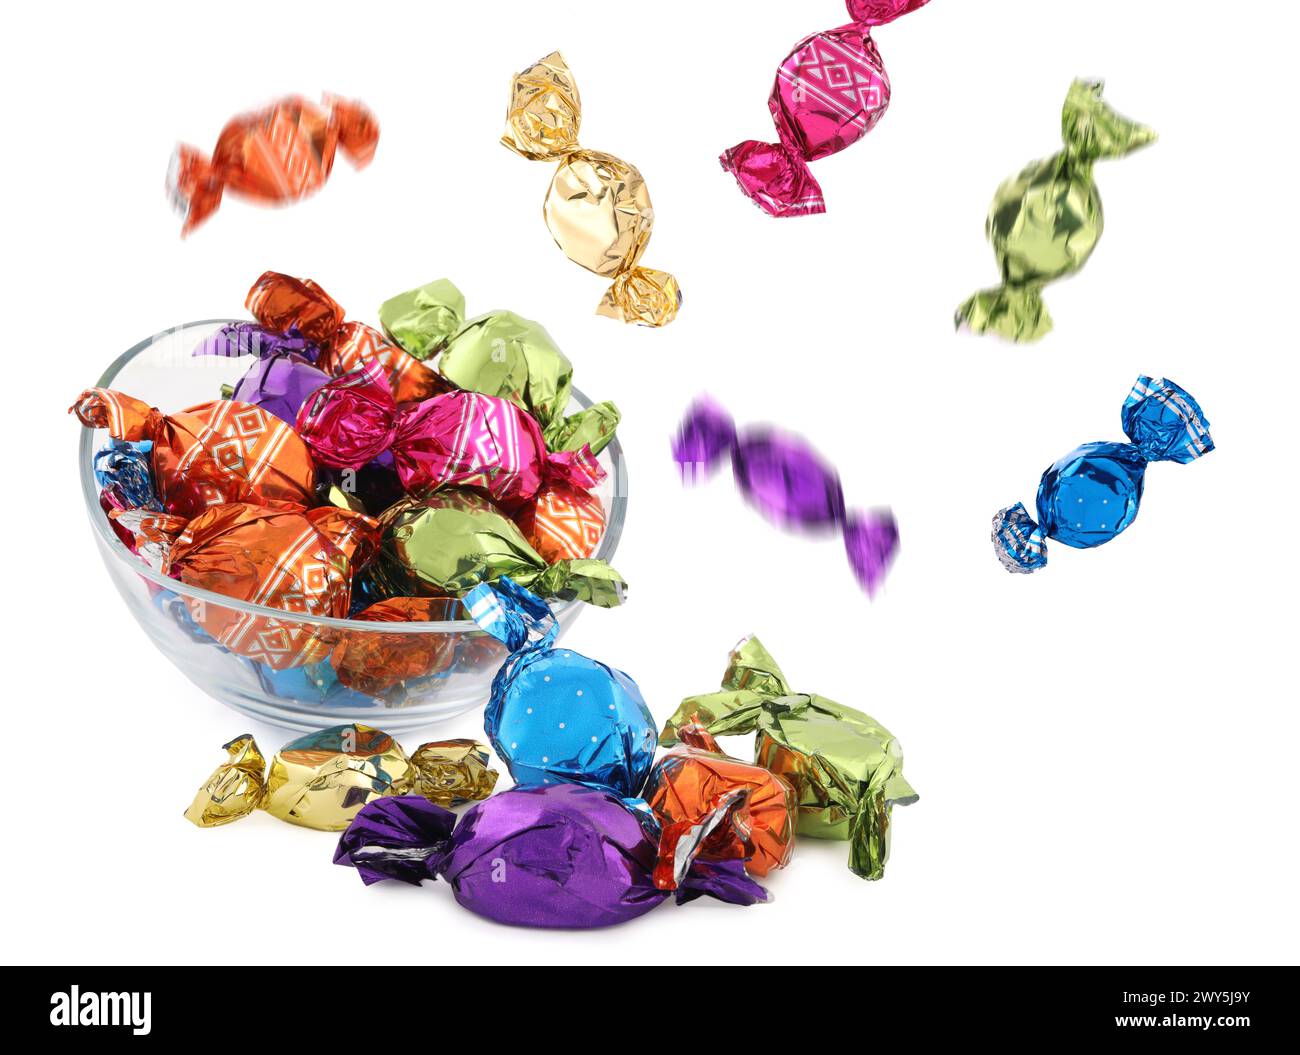 Candies in bright wrappers falling over bowl on white background Stock Photo